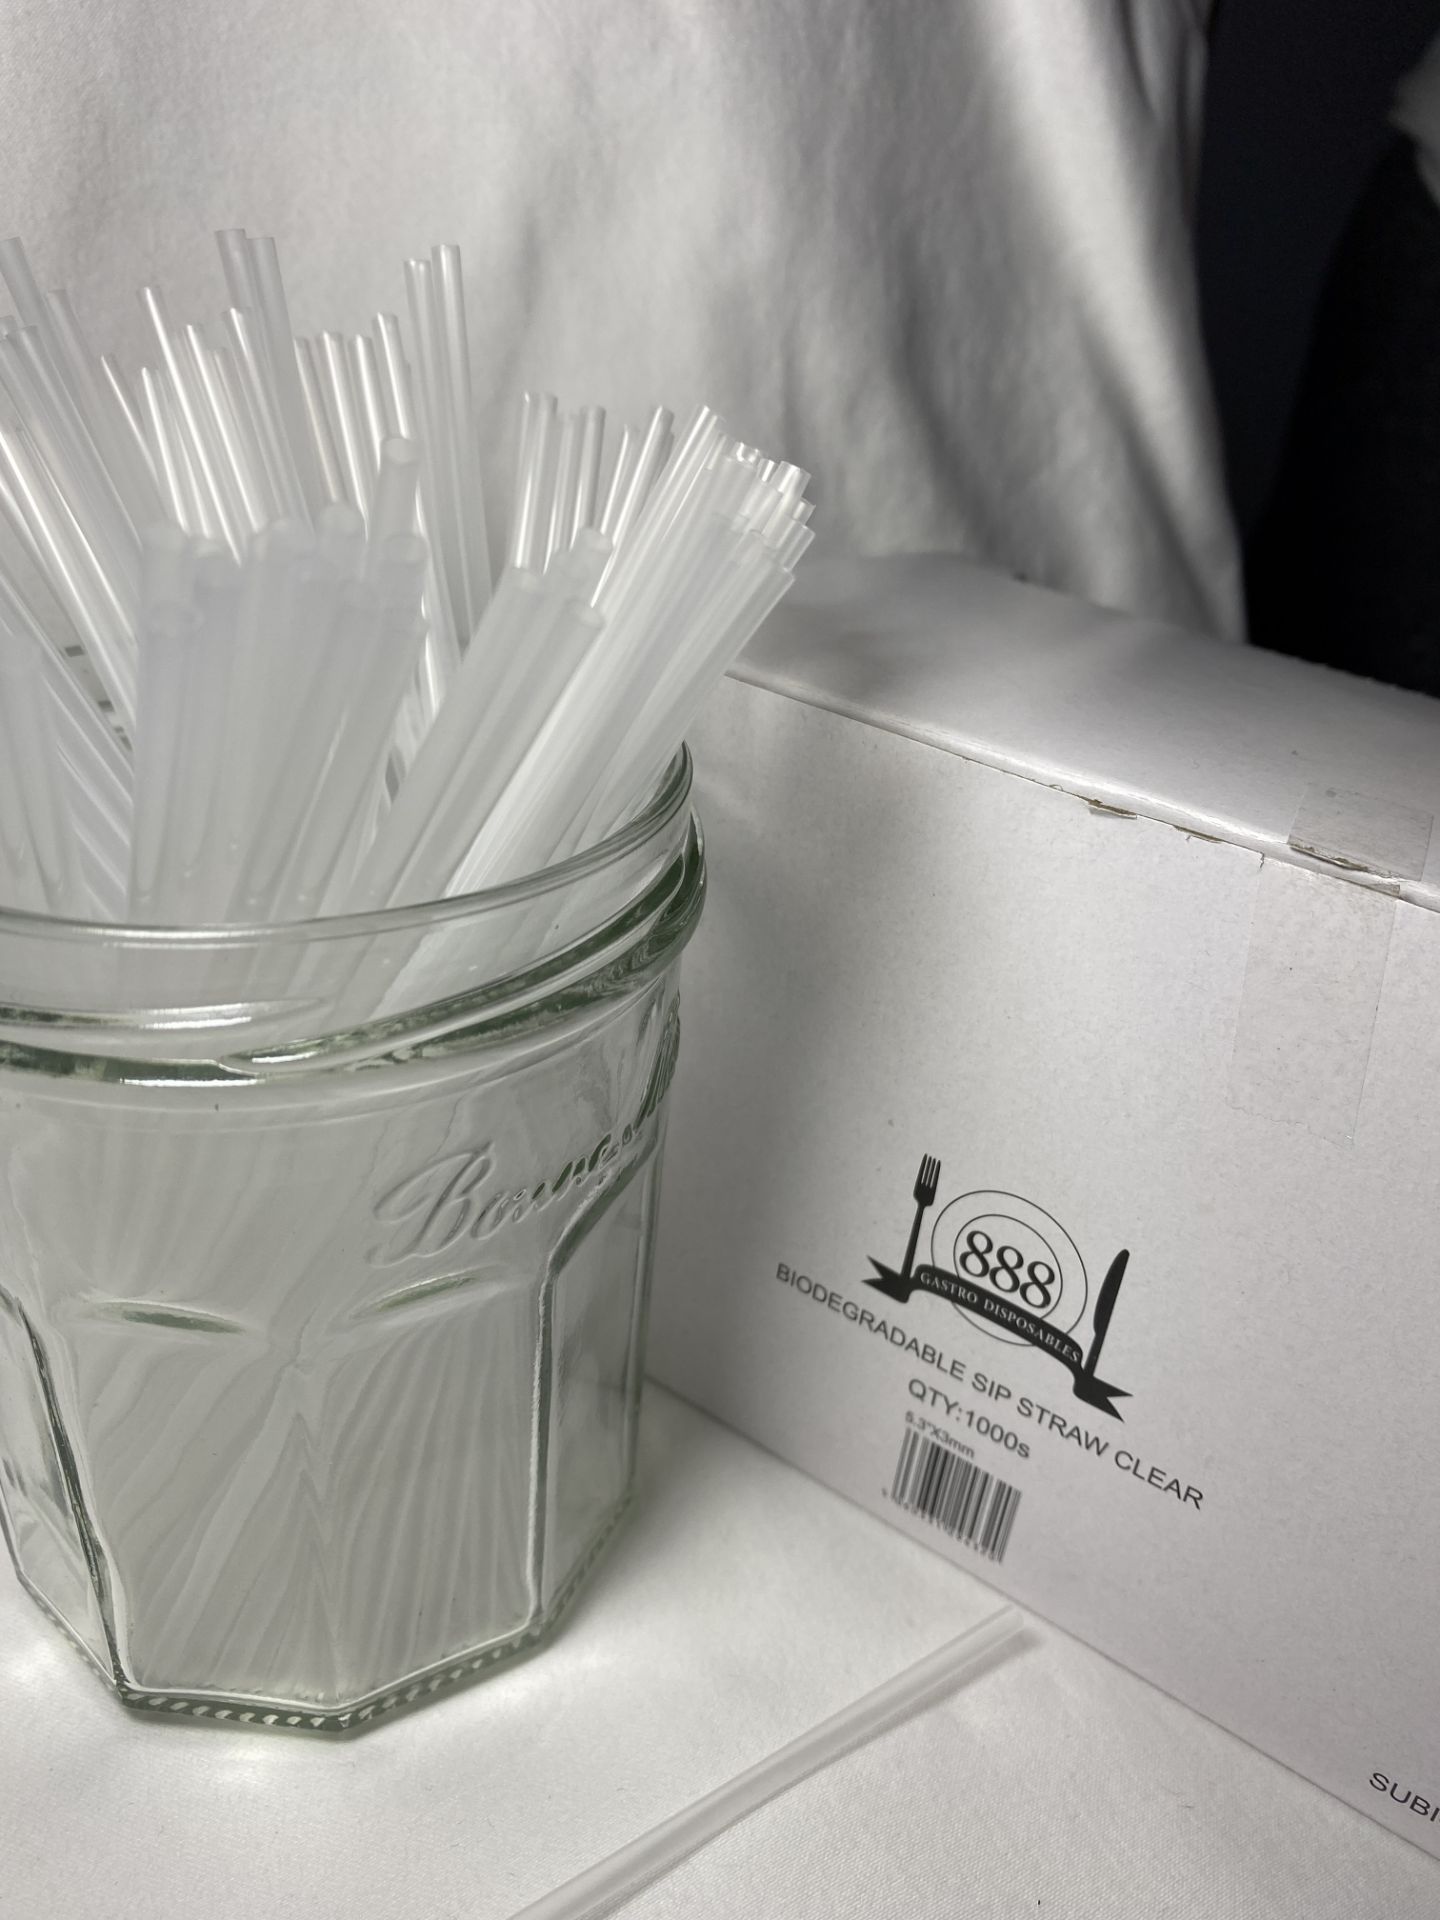 2 x Boxes of Biodegradeable Sip Straws by 888 Gastro Disposables | DSP57 - Image 2 of 3